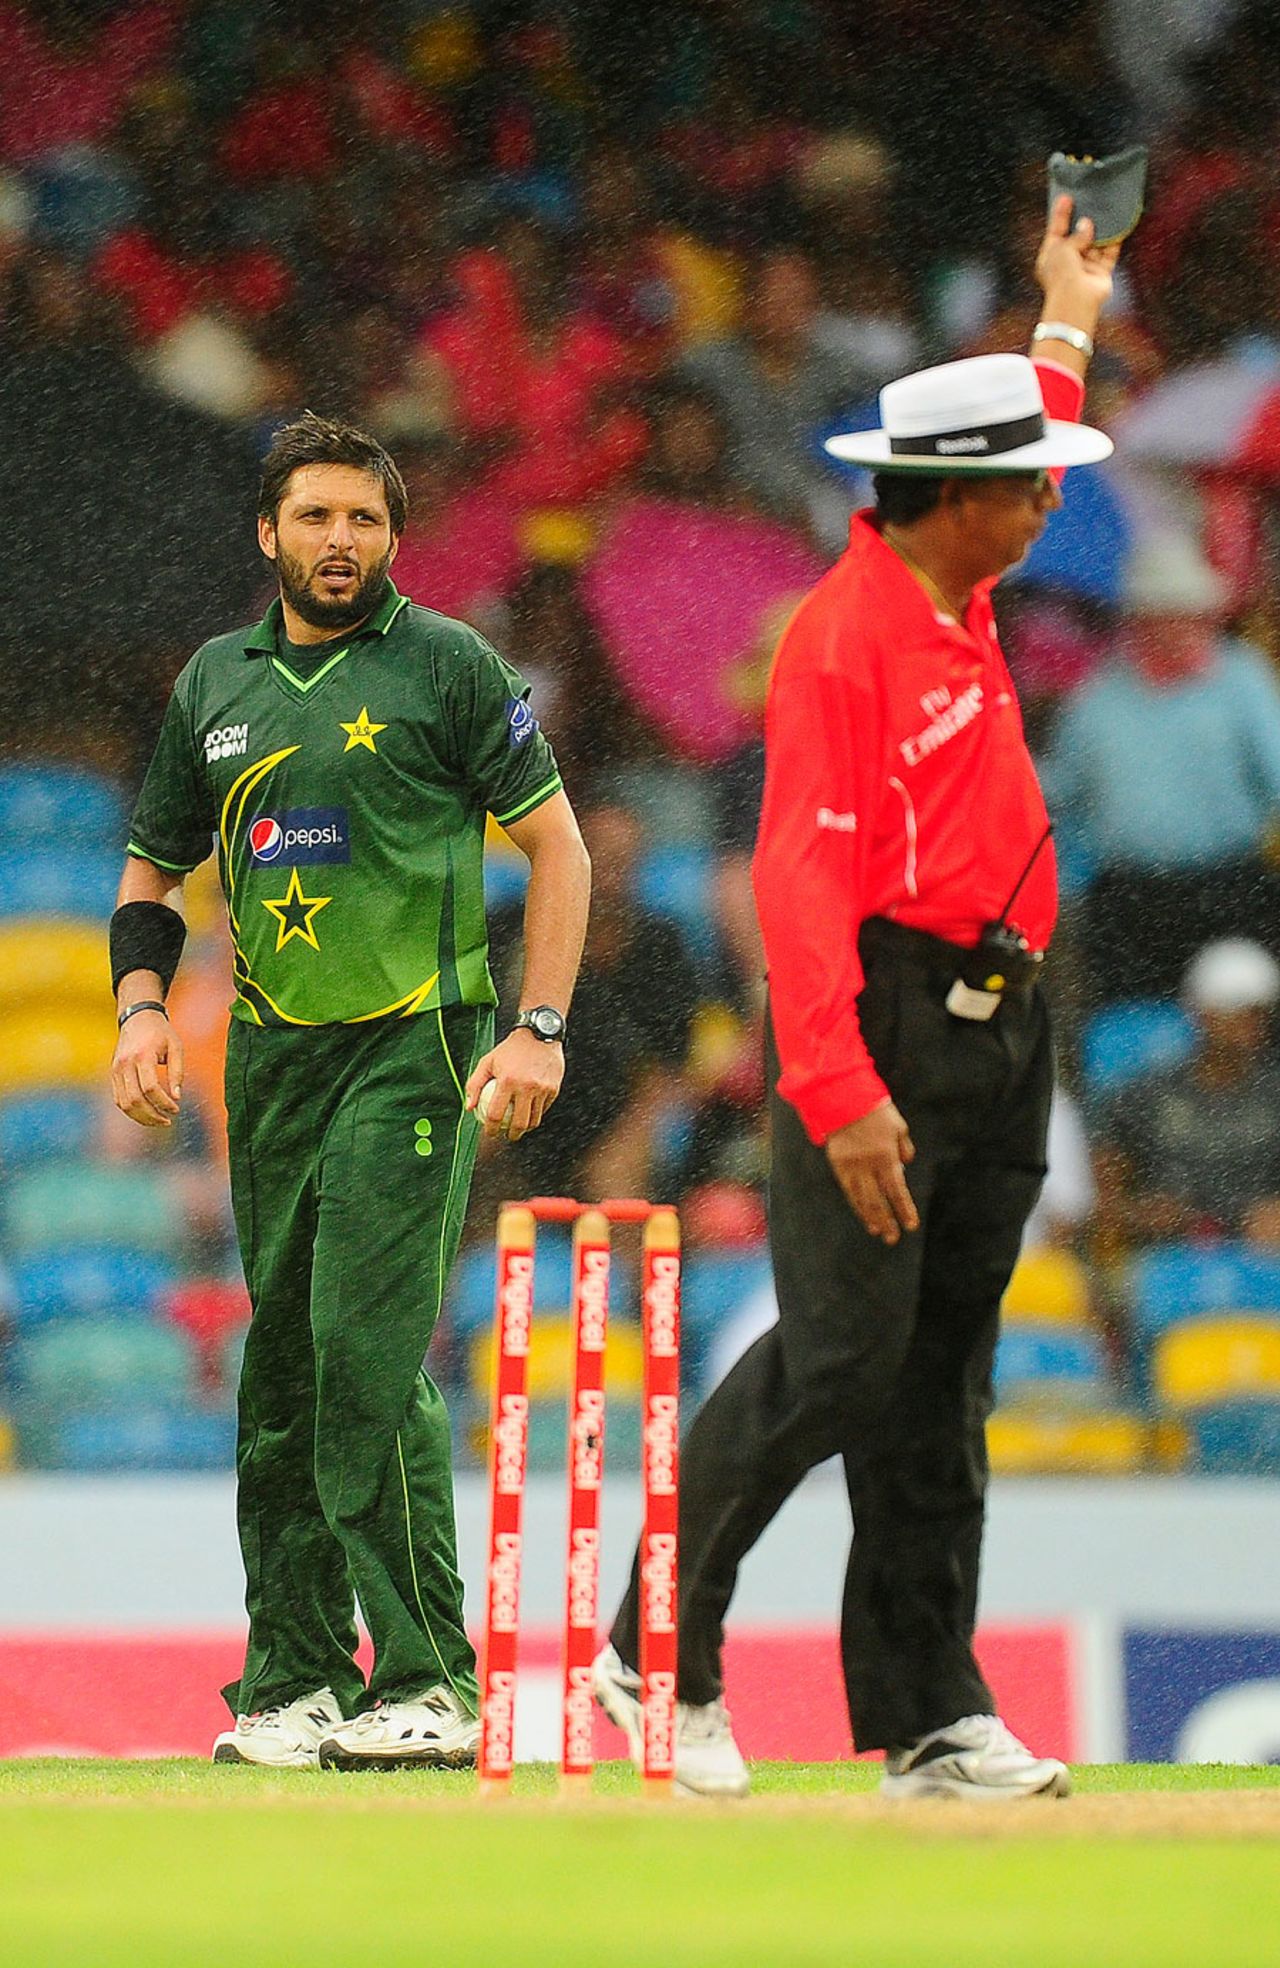 Shahid Afridi watches as Asoka de Silva calls for the covers, West Indies v Pakistan, 4th ODI, Barbados, May 2, 2011